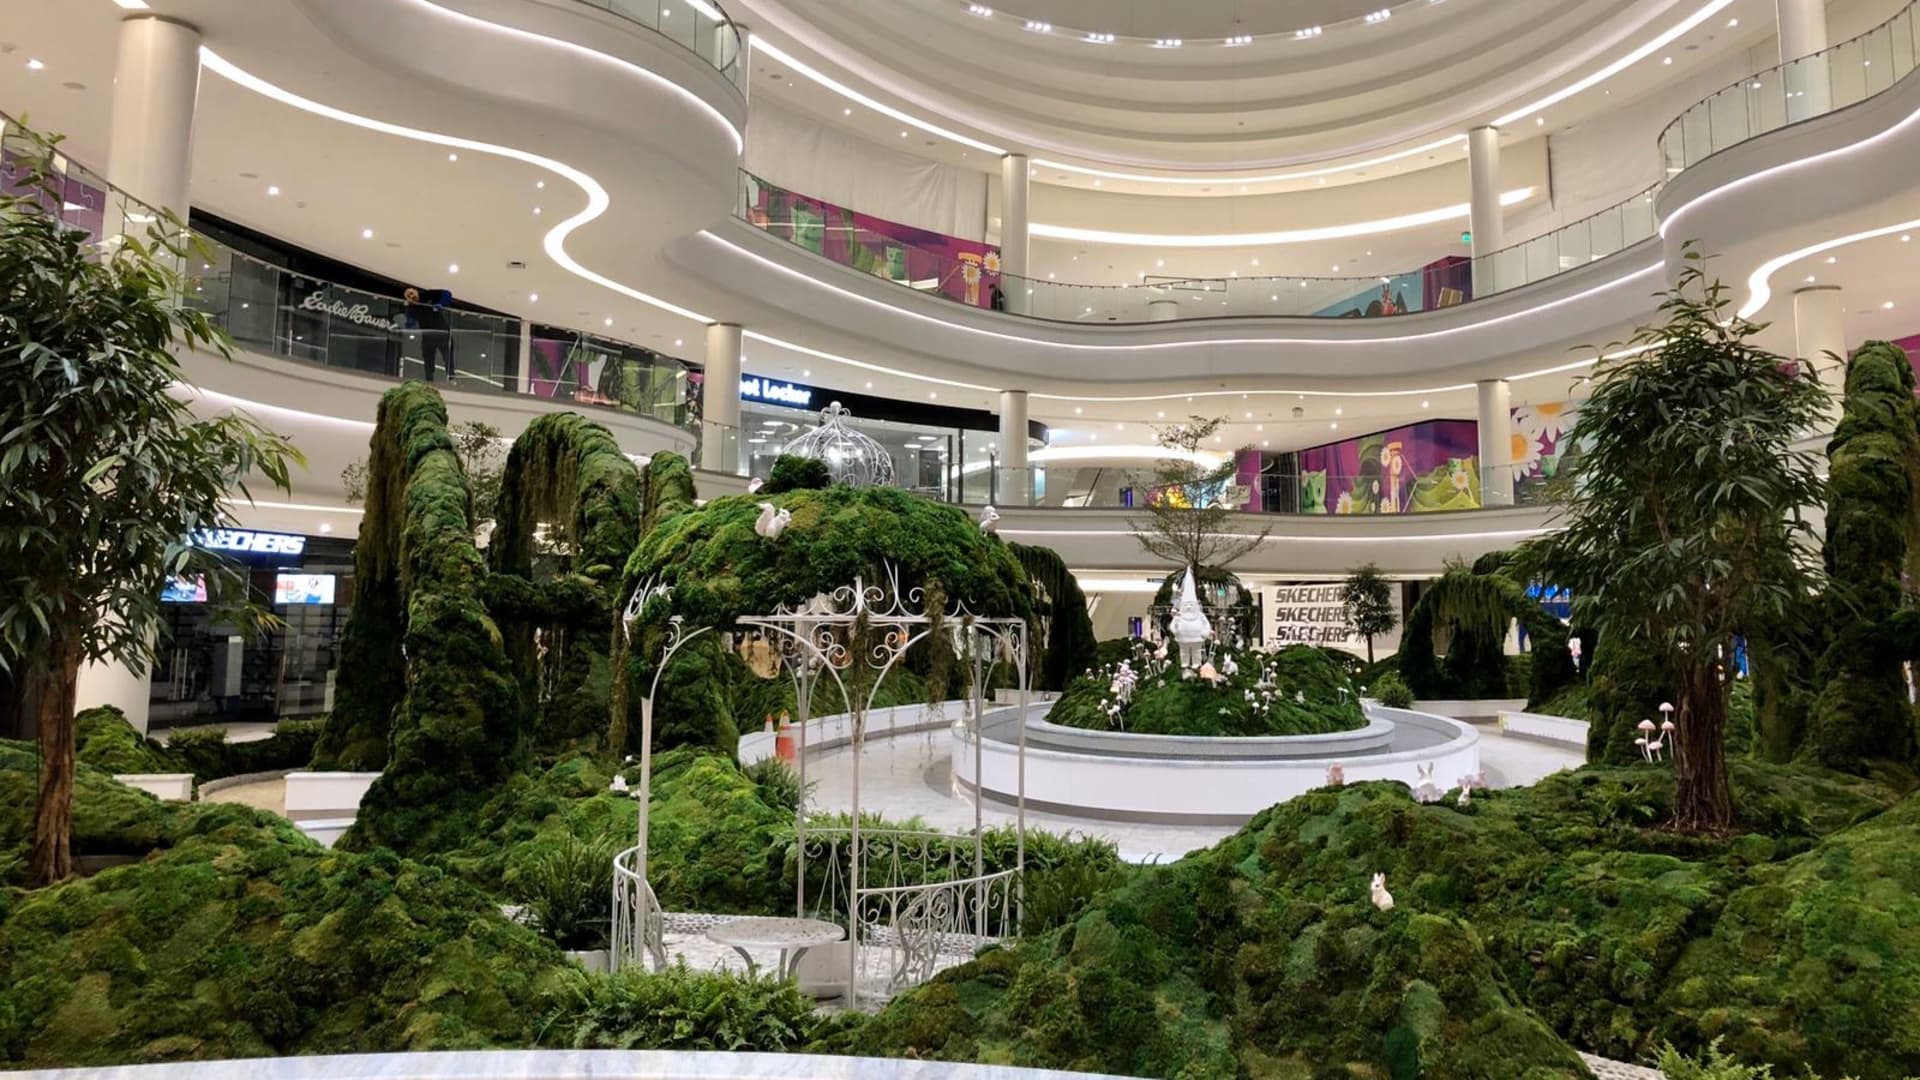 Photos Inside New Jersey's American Dream mall, as it reopens